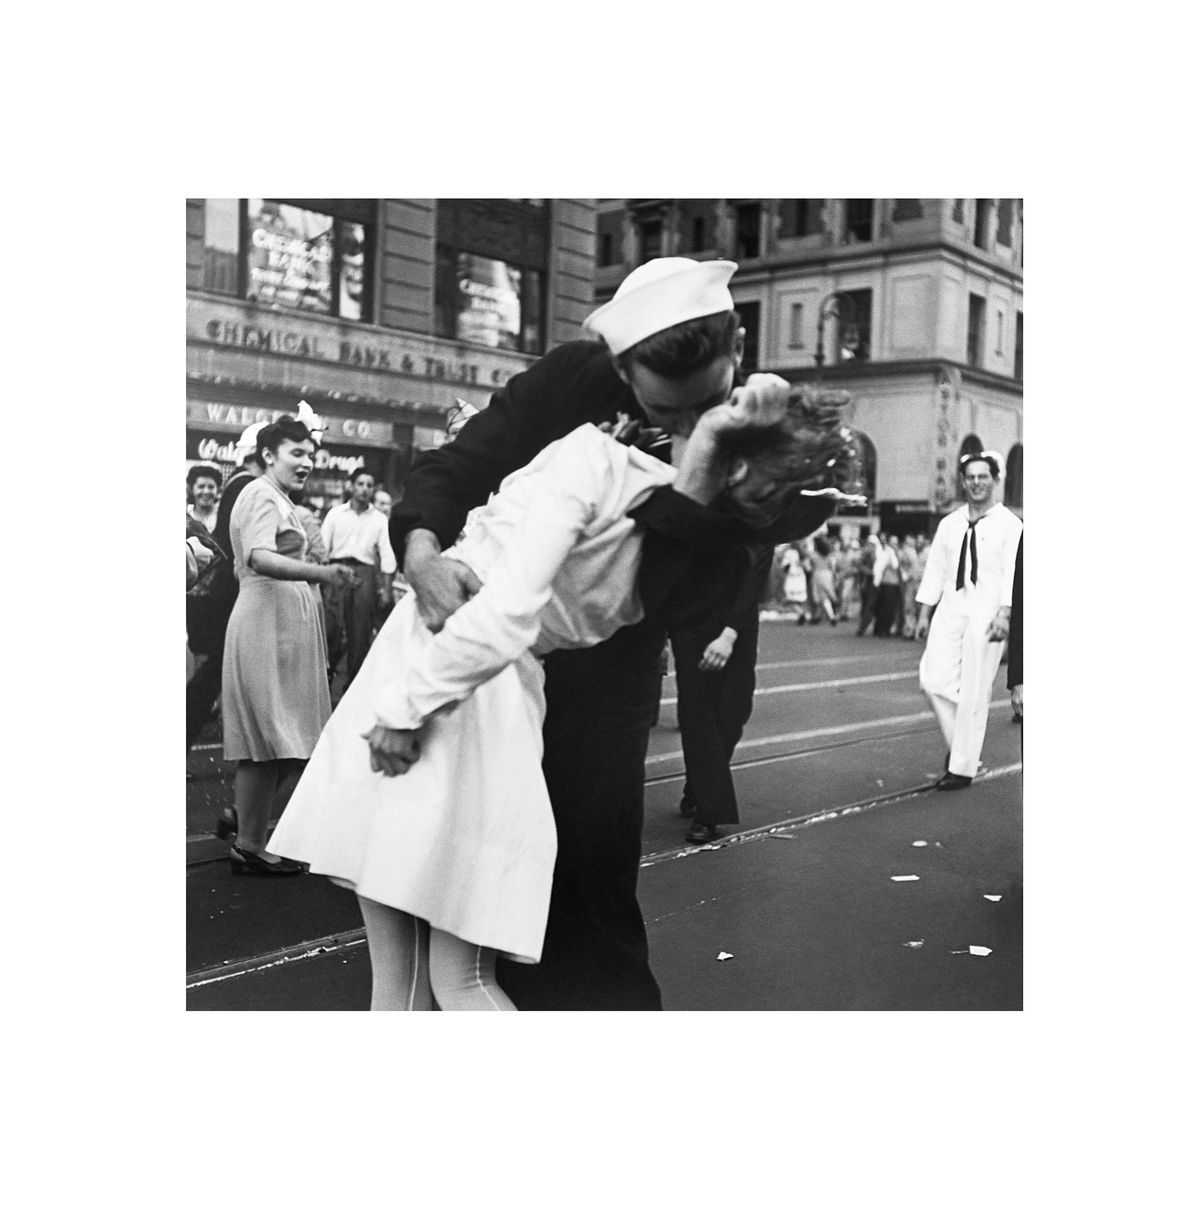 Among the students’ favorite photos was the iconic “Kissing the War Goodbye,” taken August 1945 in Manhattan.